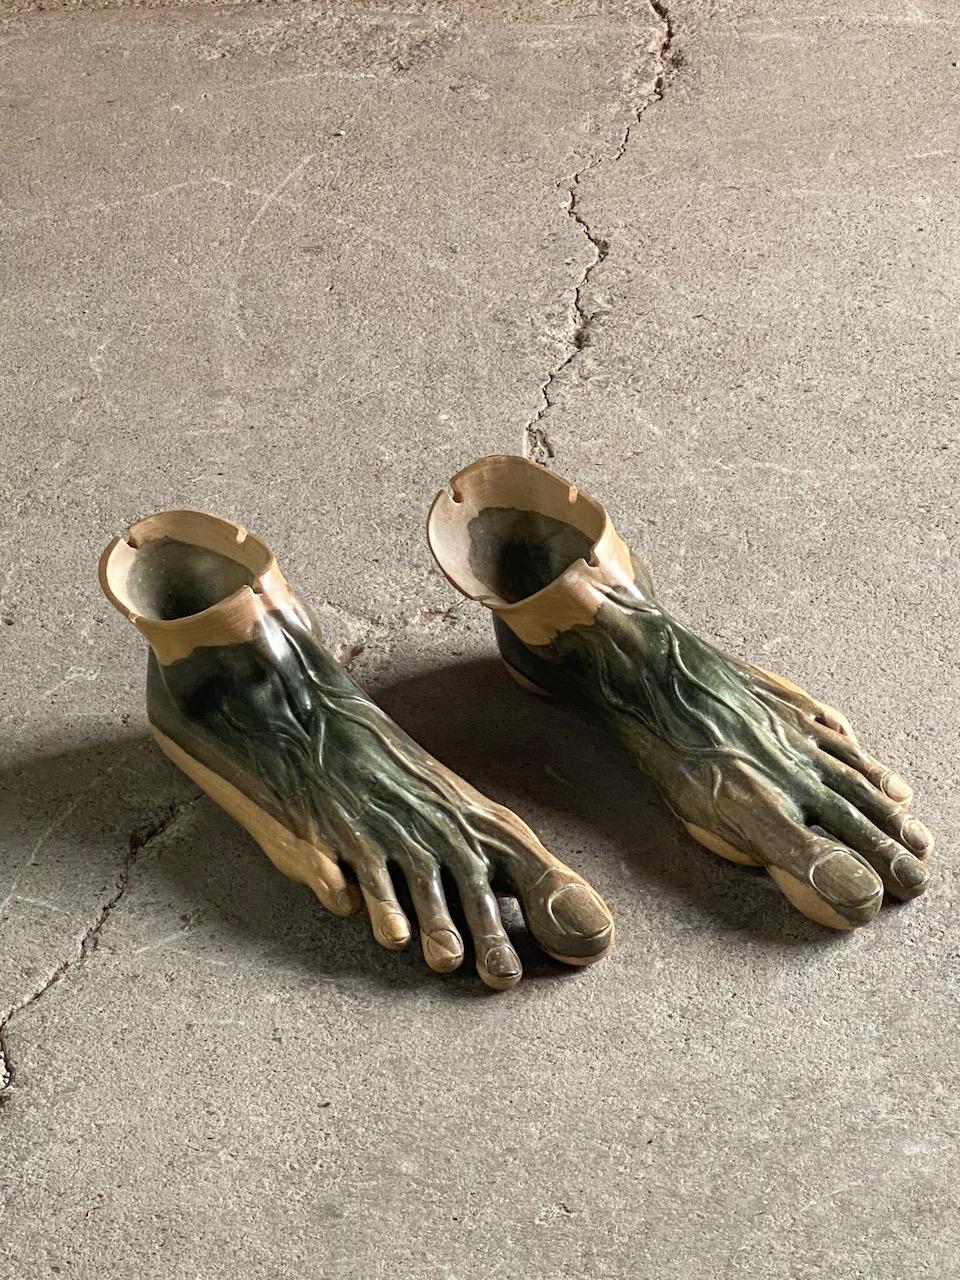 Sycamore Large Art Carved Feet Sculptures or Ashtrays, France, Circa 1970s